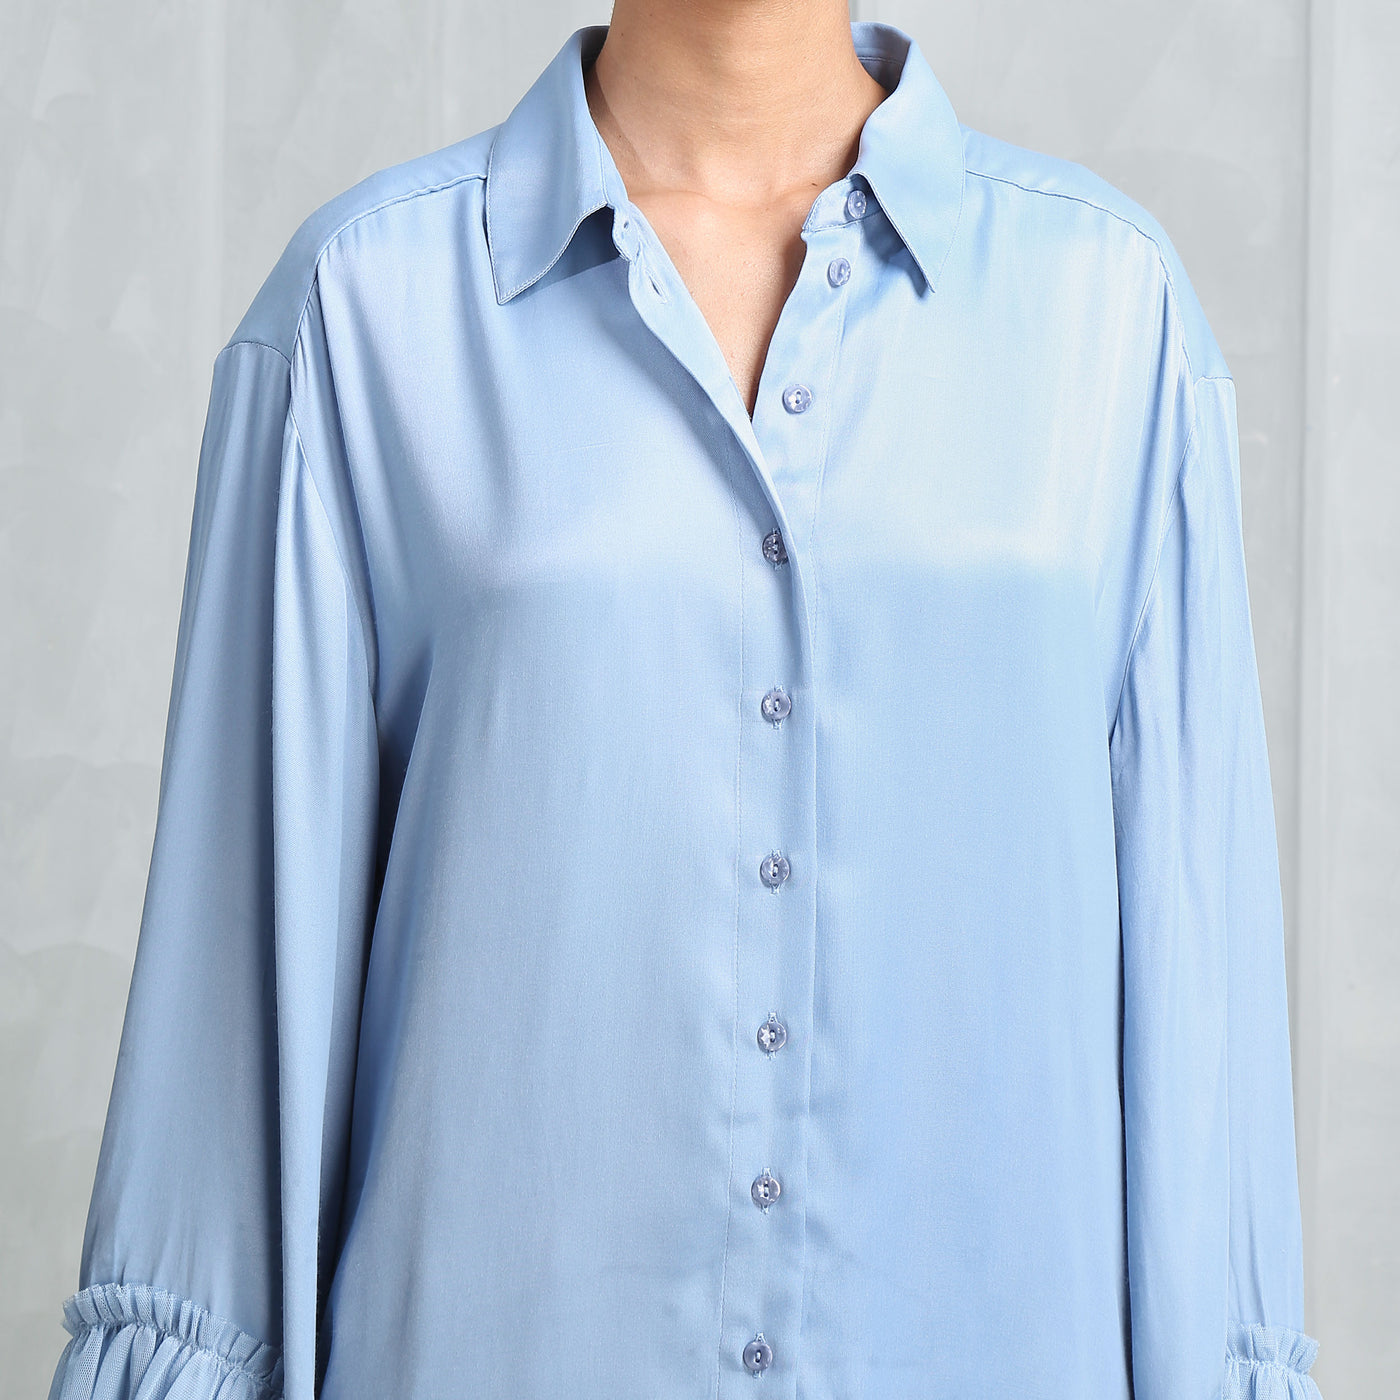 Malie Santos Ruffle-trimmed Shirt  features an oversized trim, collared neck, front button fastening.